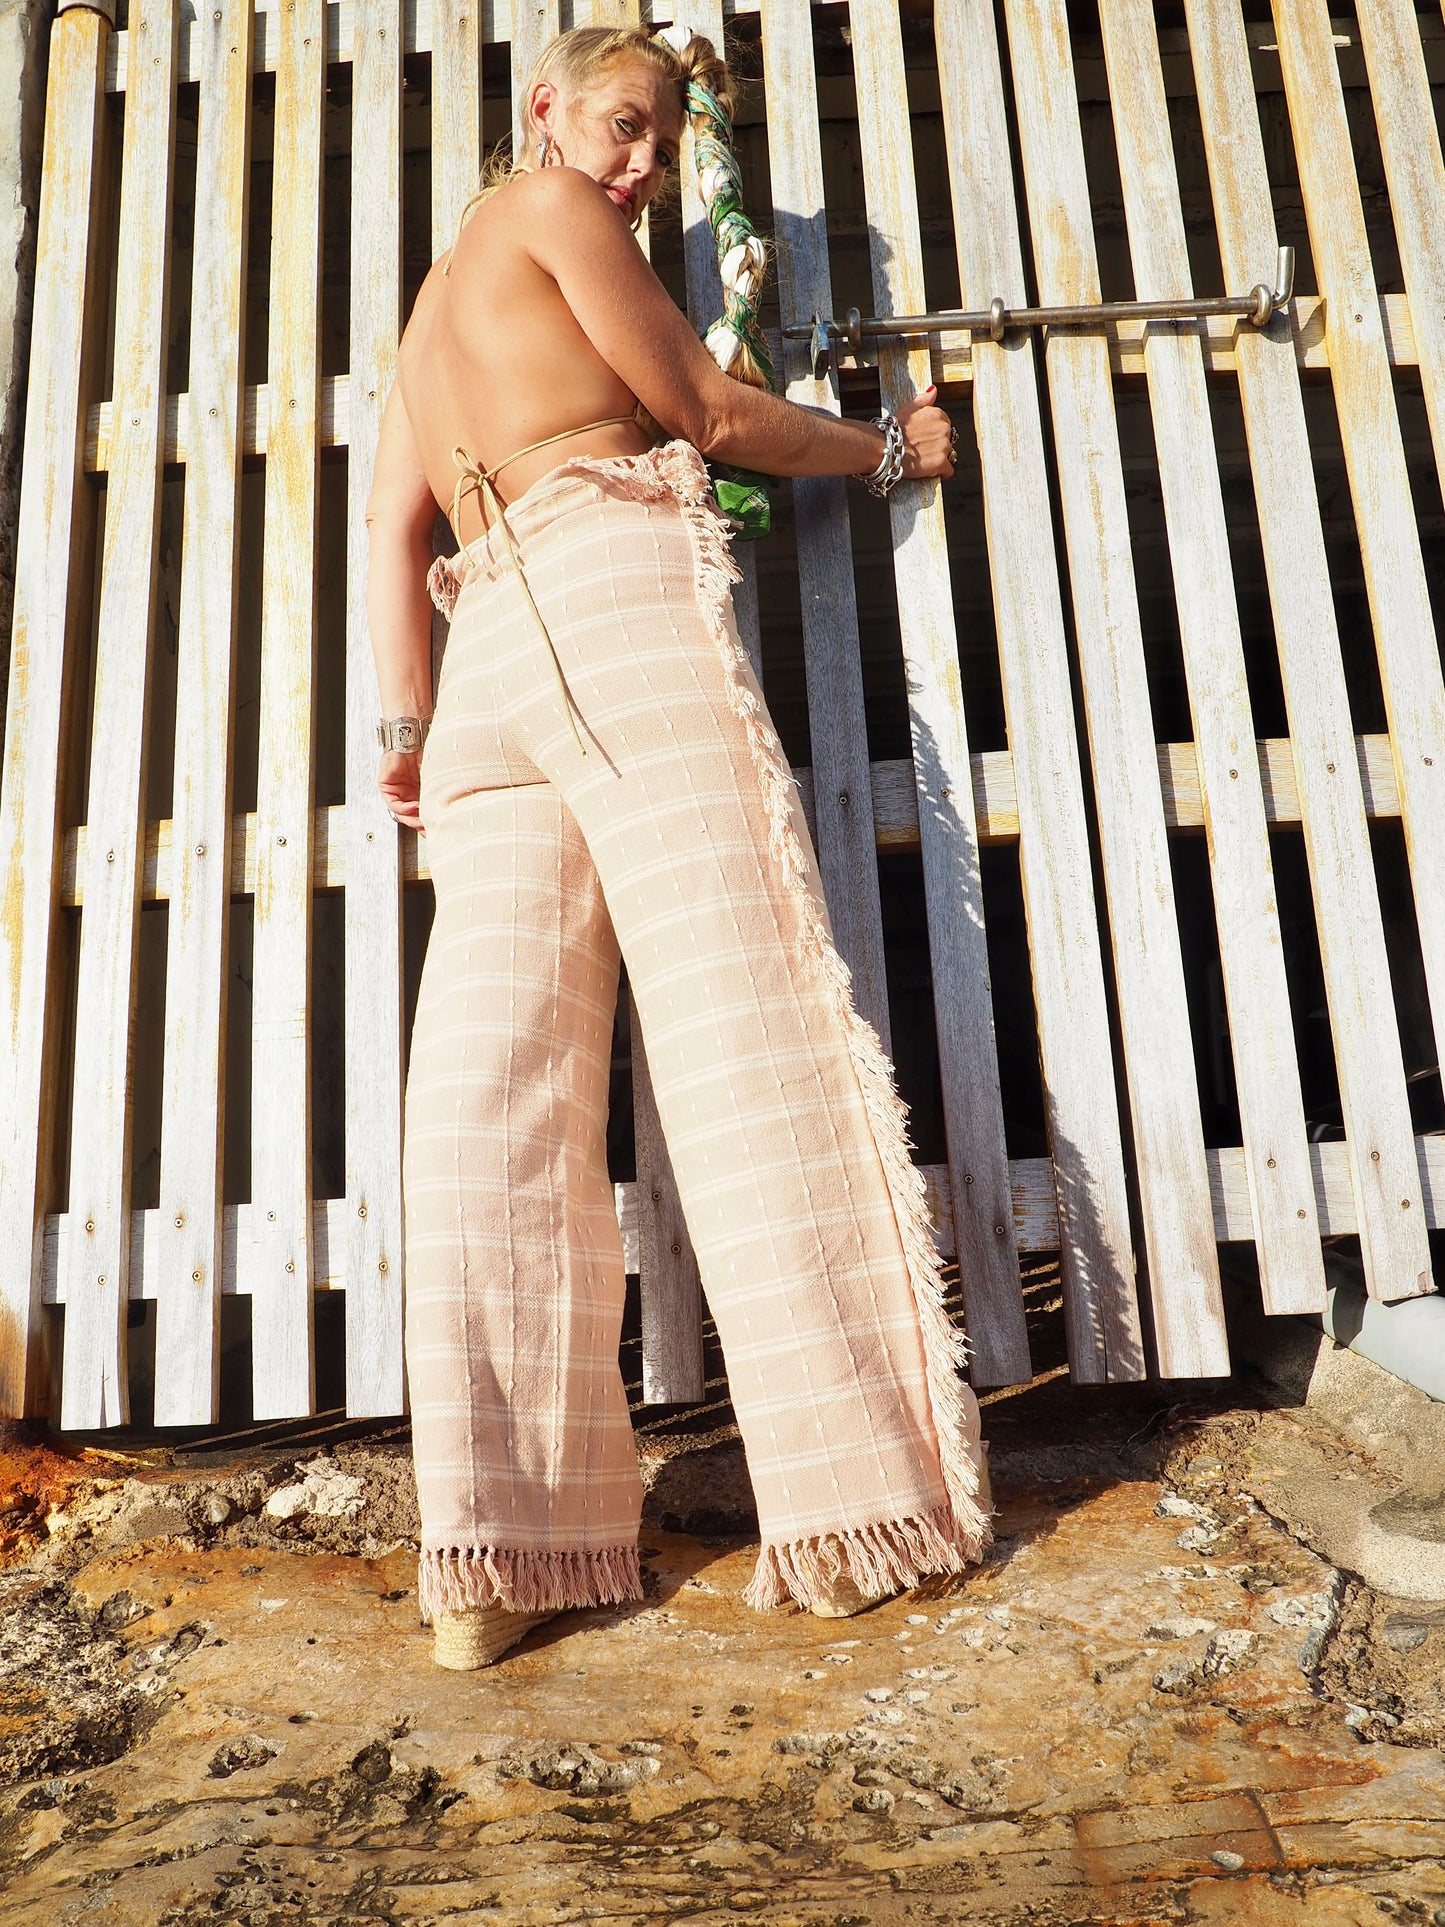 Wide leg pants with elastic waste made by vagabond Ibiza from vintage woven cotton tassel blanket with tassel side trim.